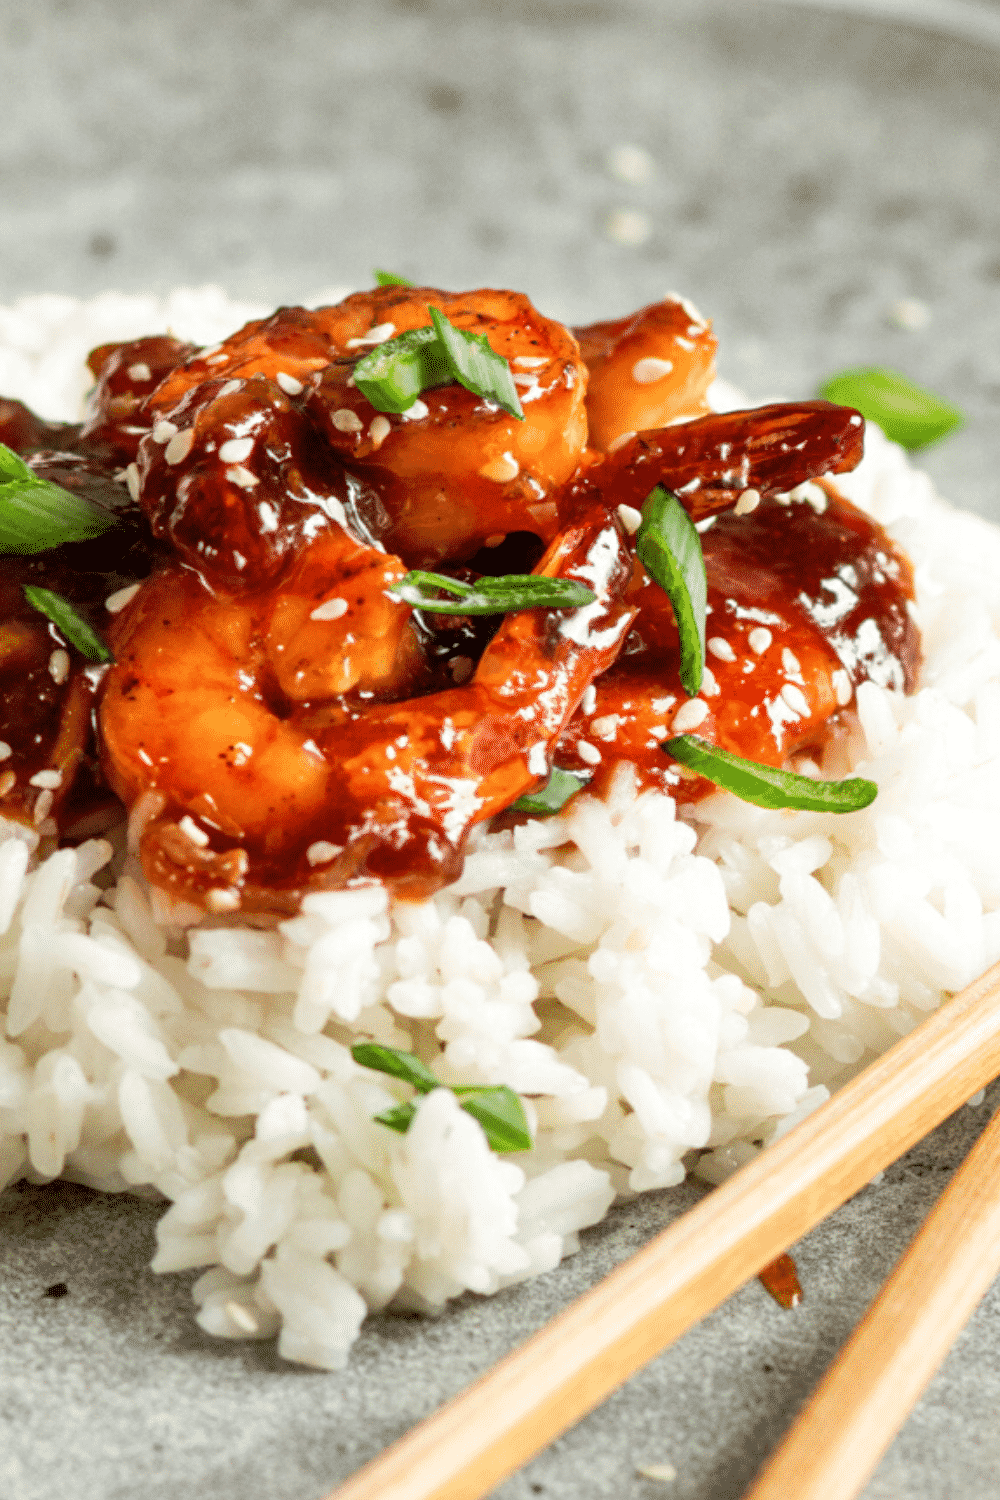 A few pieces of sweet and sour shrimp on a bed of white rice on a gray plate.